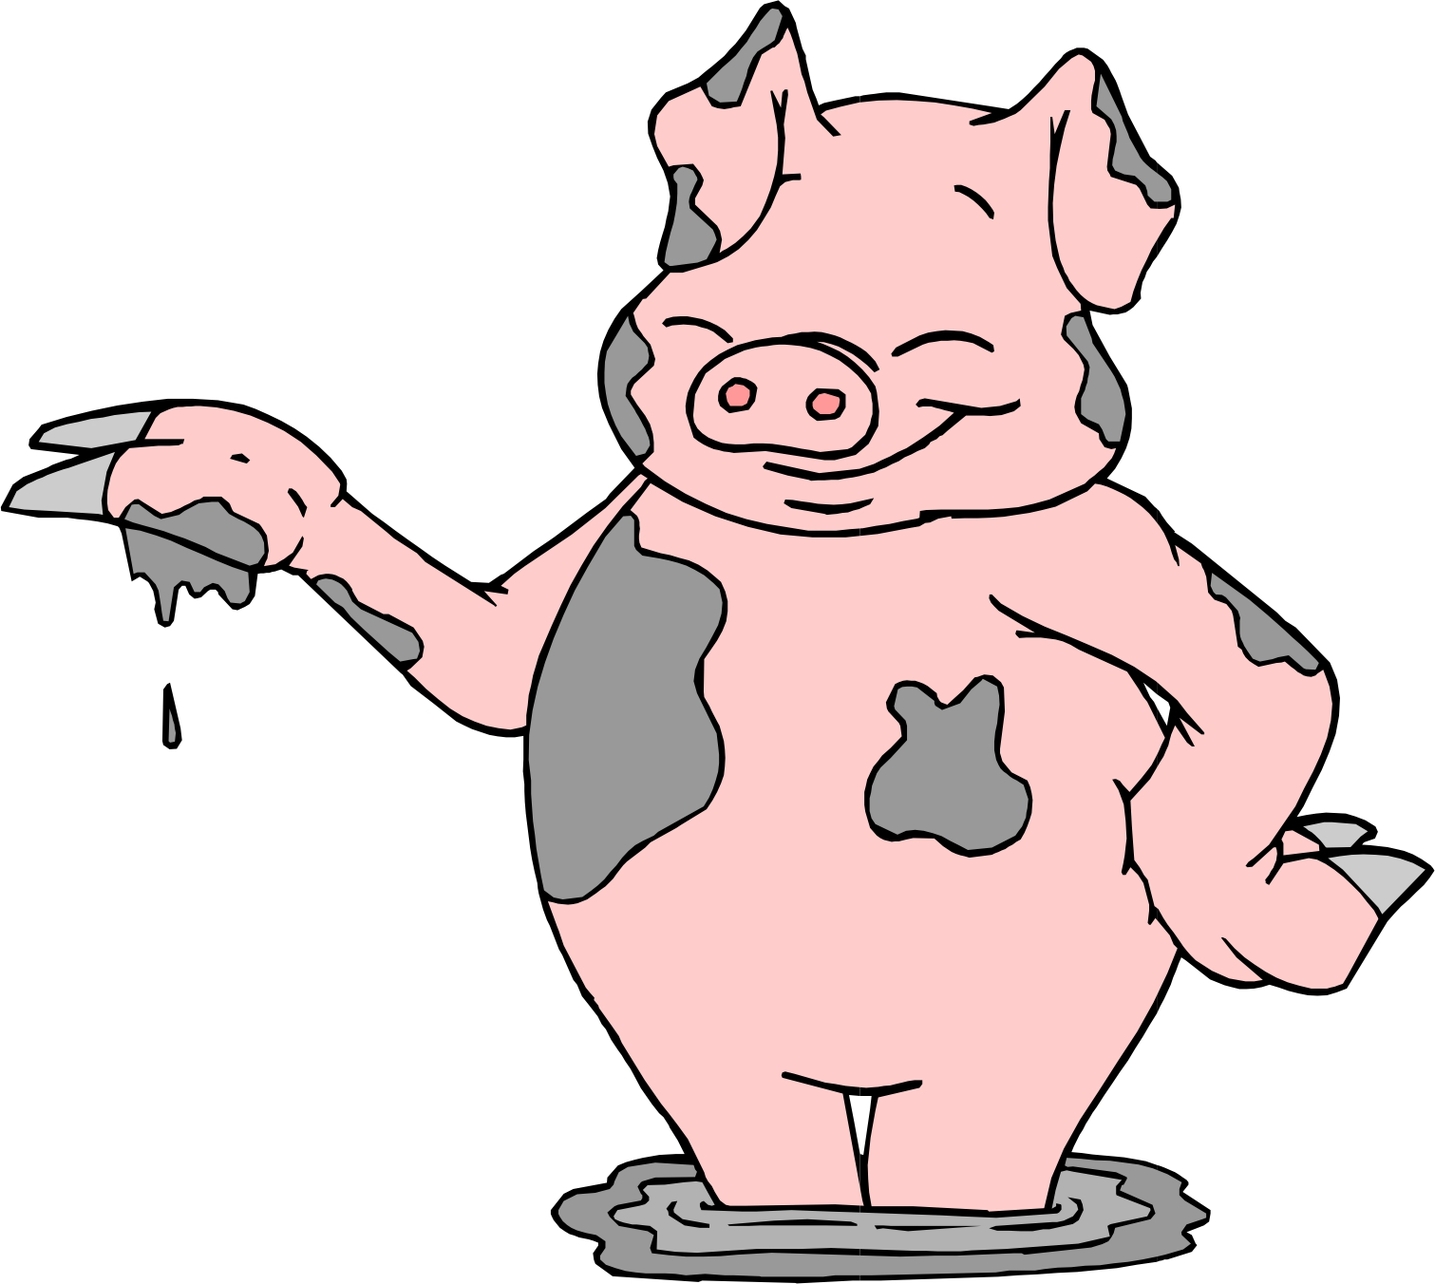 Clip Arts Related To : cute pigs clip art. view all Dirty Pig Cliparts). 